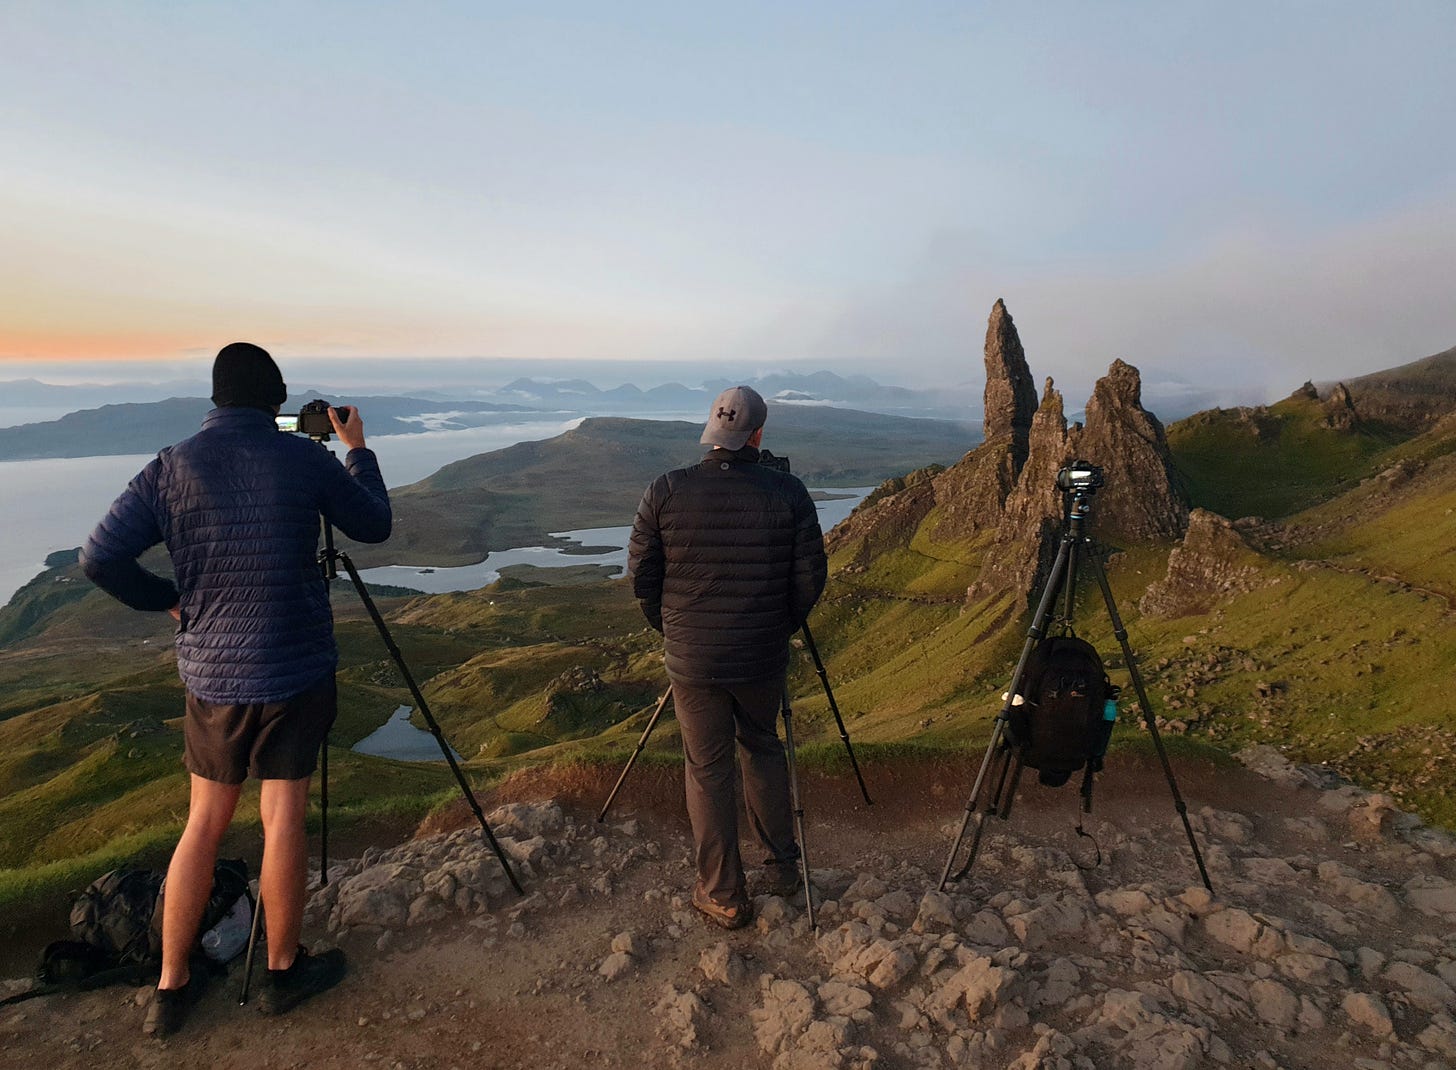 Waiting for the sunrise at the Old Man of Storr